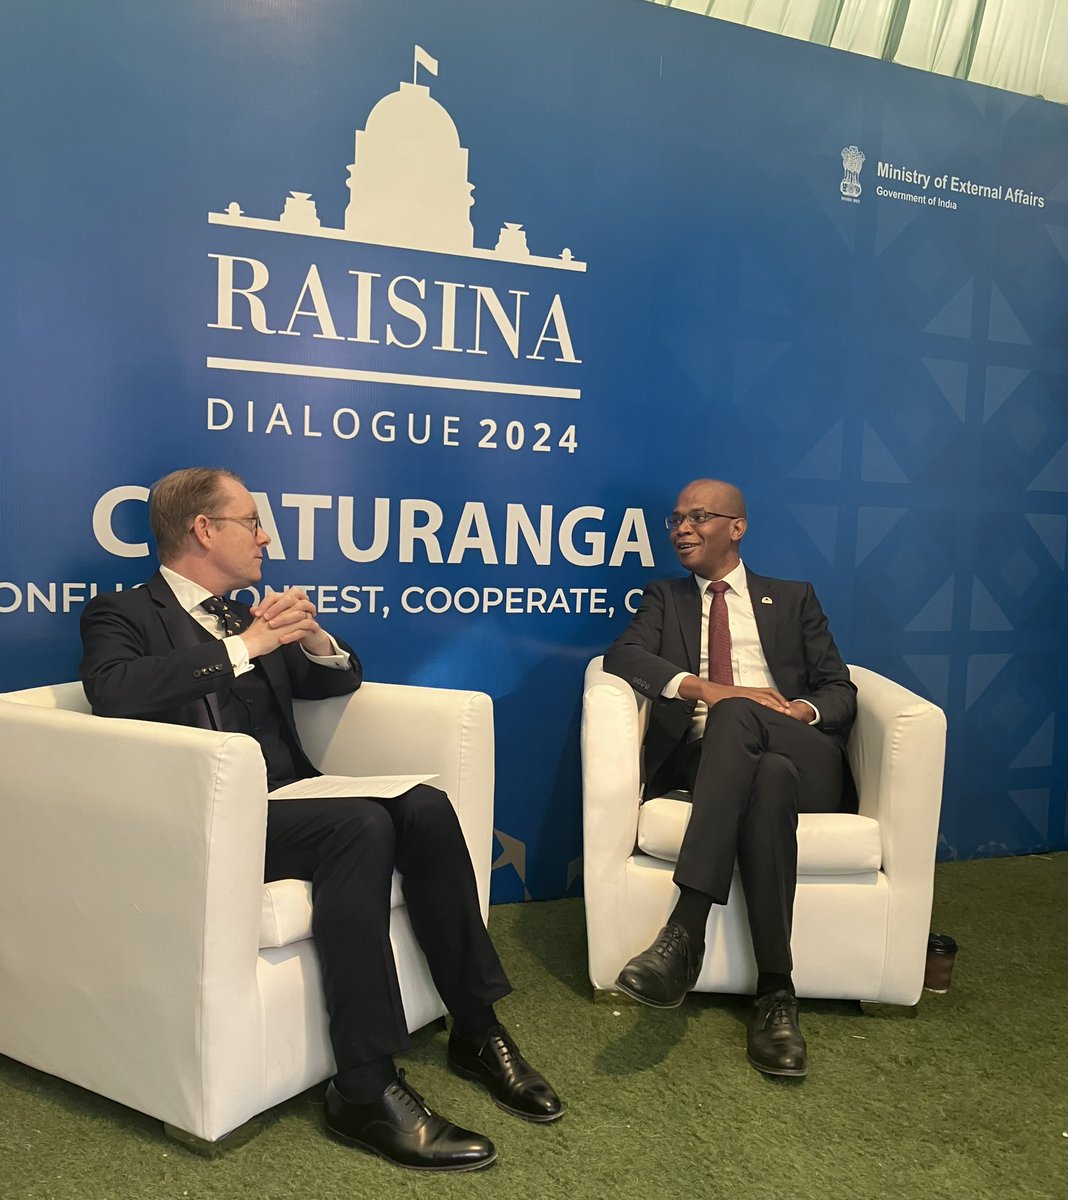 Met with H.E. @JMakamba, foreign minister of Tanzania. We spoke about our great trade relations and our shared interest in preserving a rules-based world order. 🇸🇪 🇹🇿